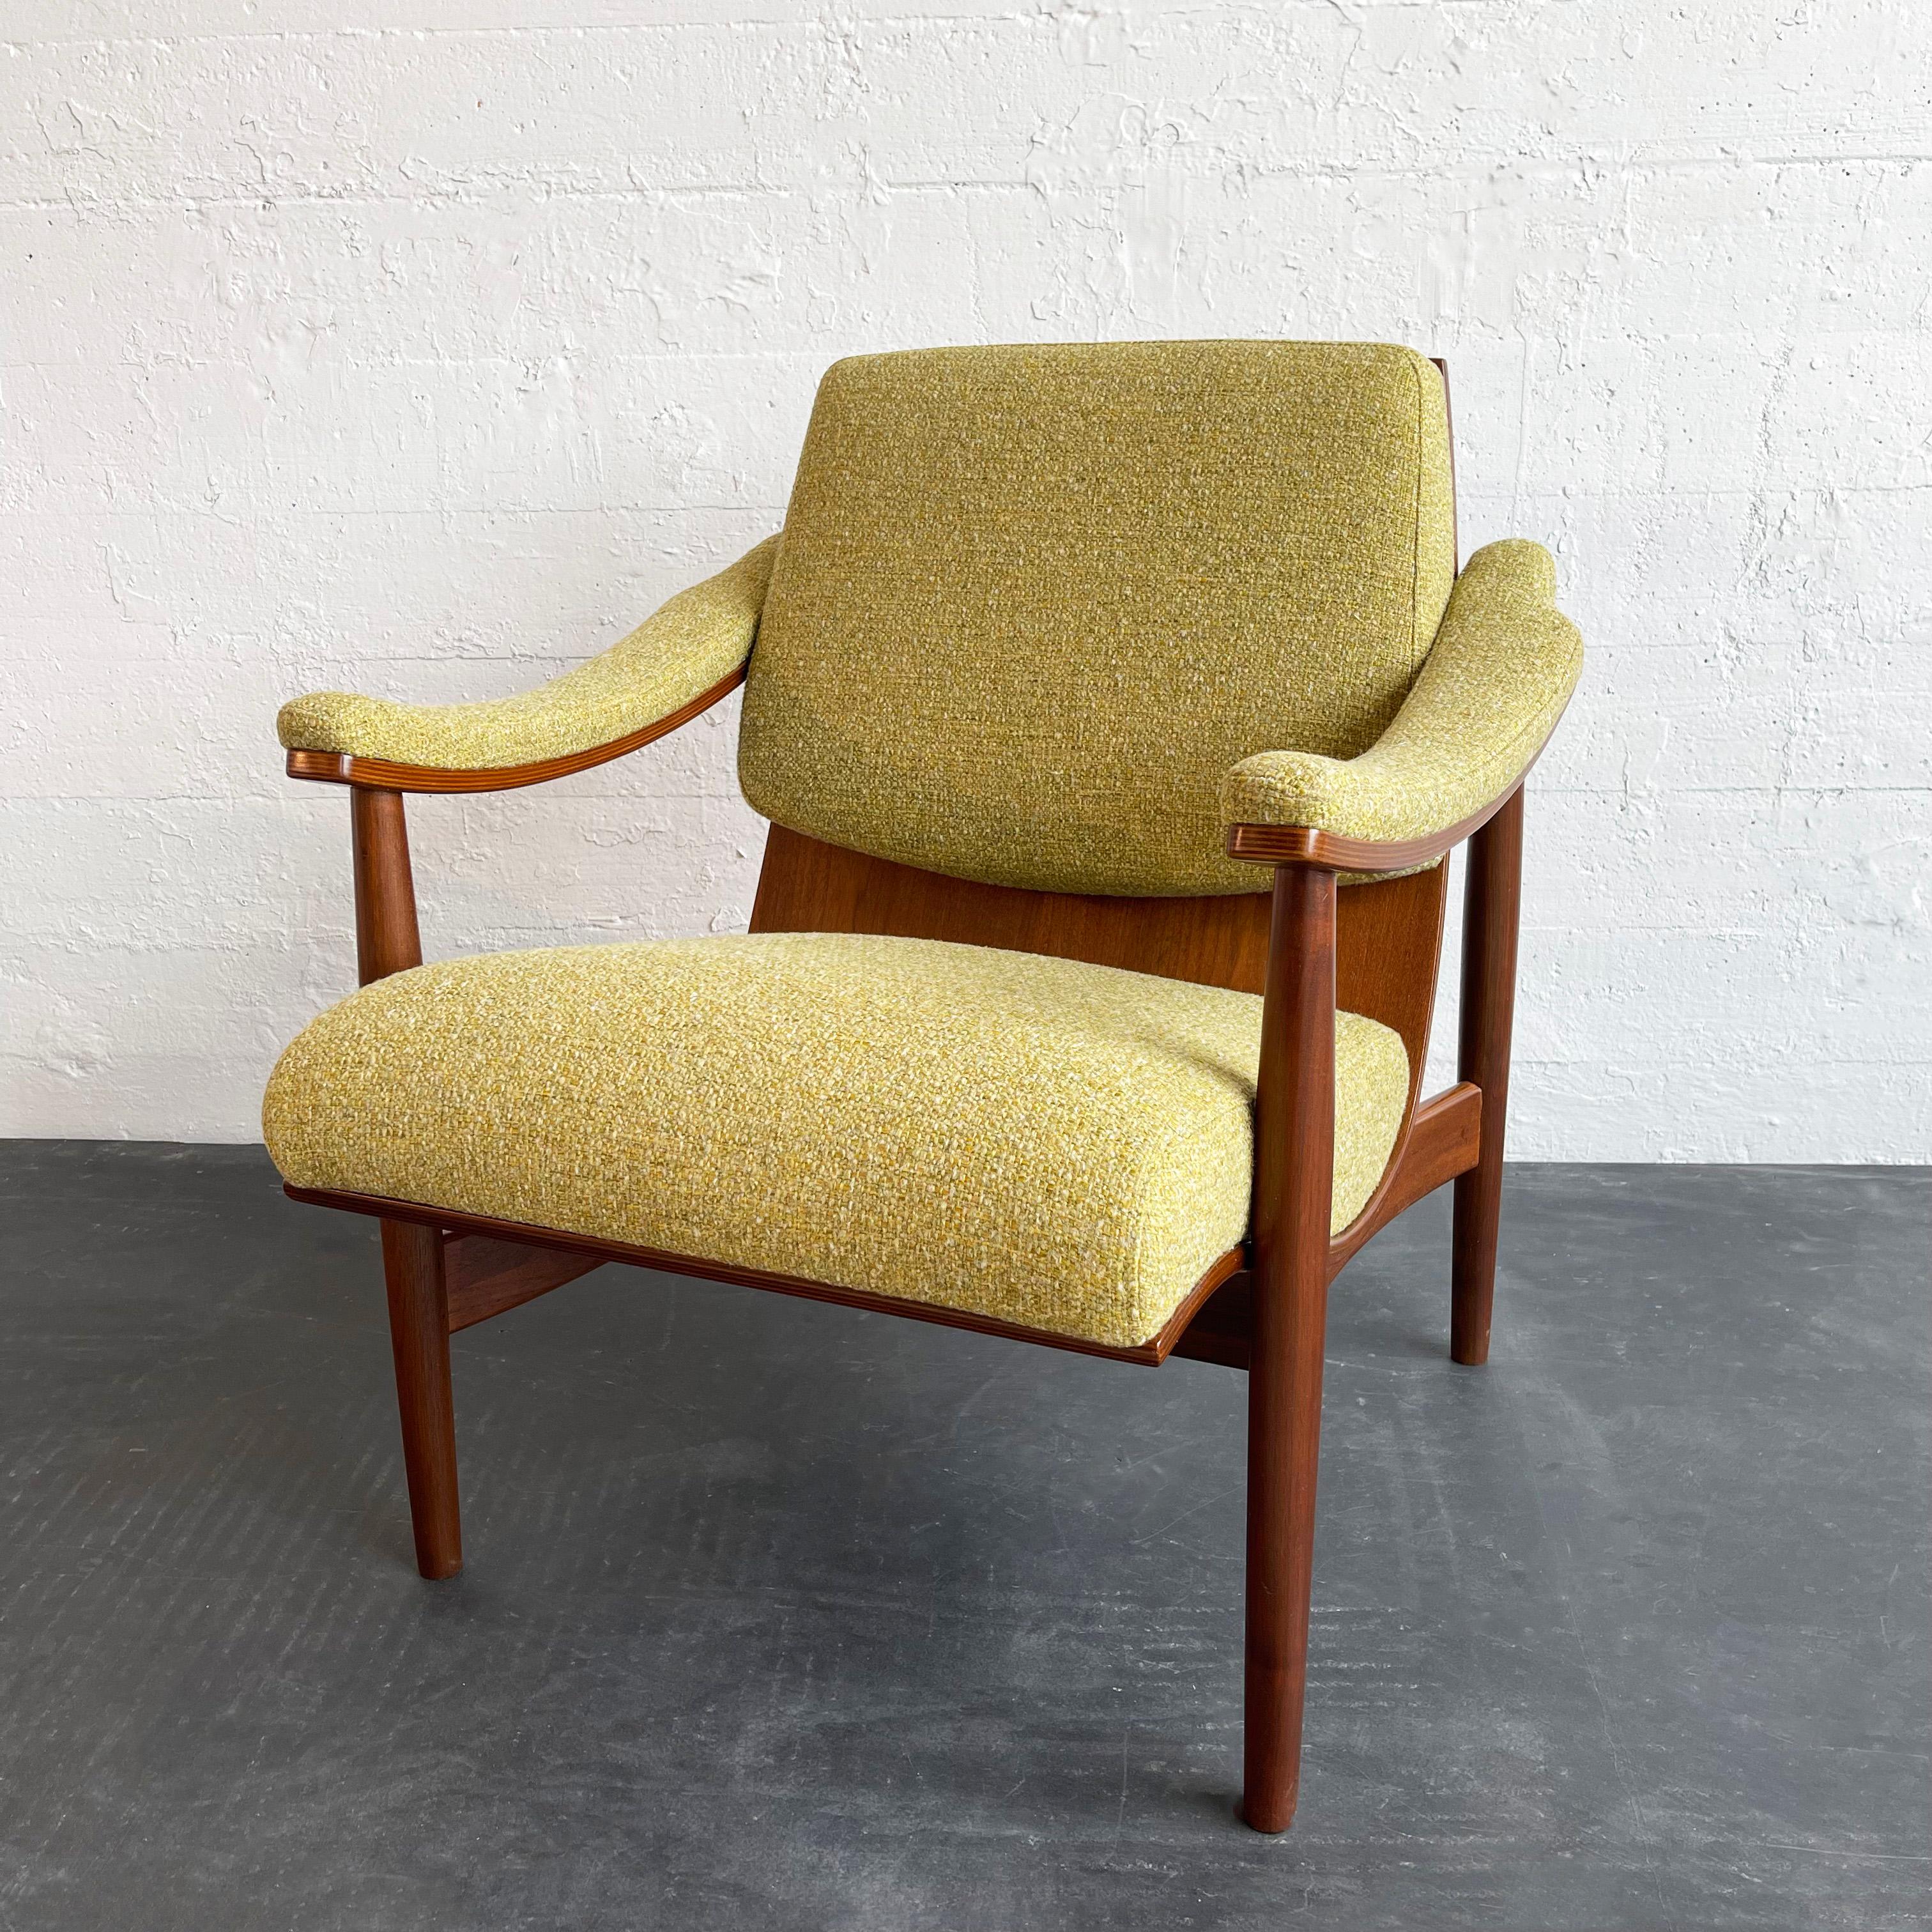 Rare, mid-century modern, walnut bentwood armchair by Thonet features a curvaceous profile with the back and seat made from a single piece of bent walnut. The segmented yellow tweed upholstery appears on the seat, back and arms and follows the lines